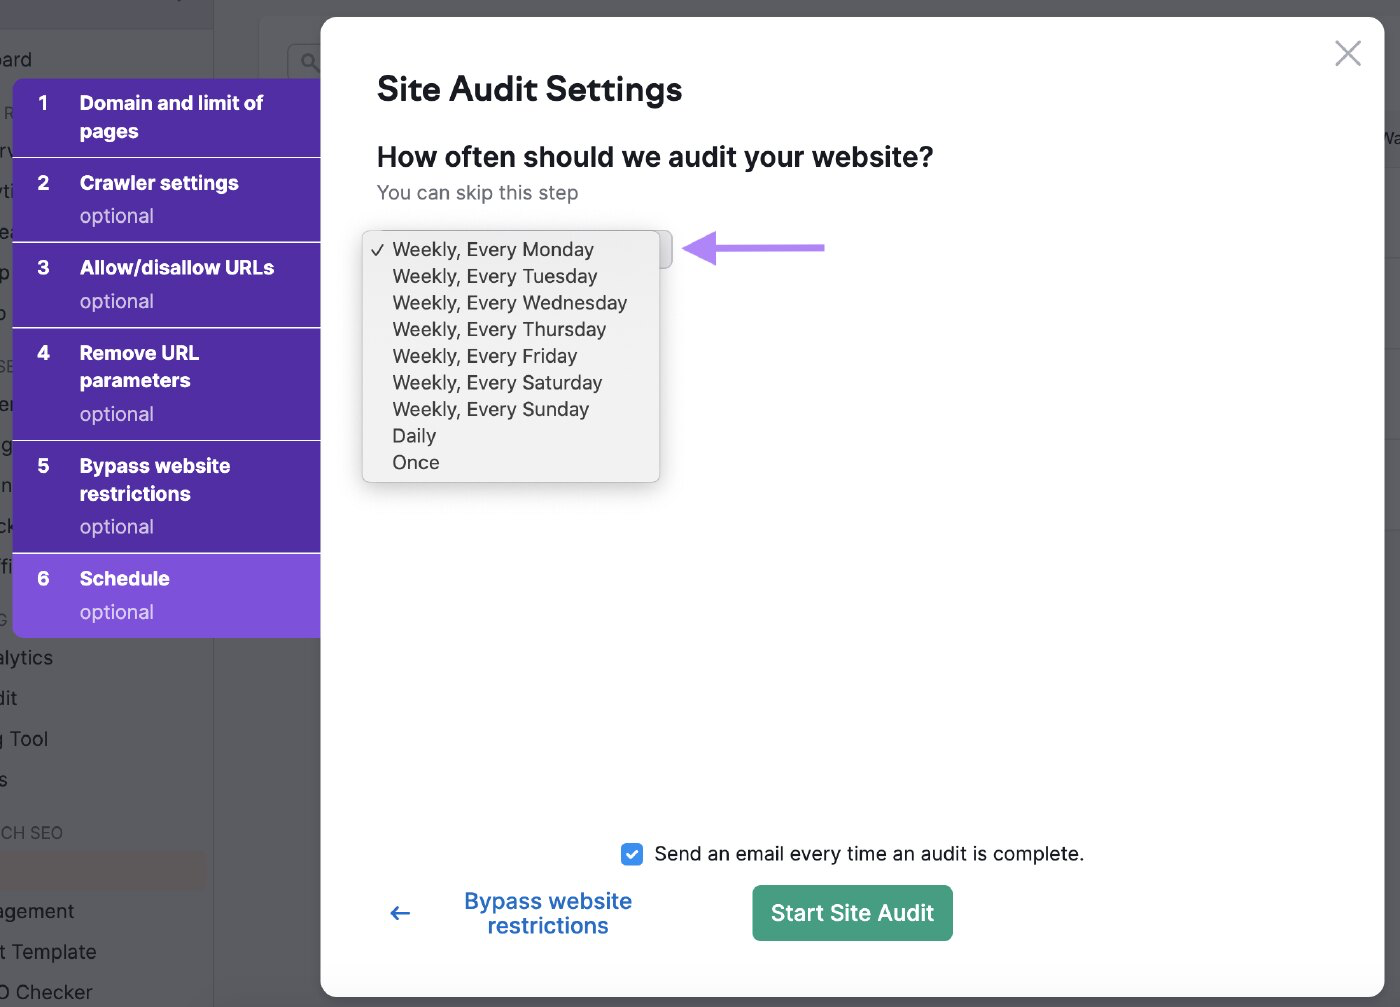 "How often should we audit your website?" settings page